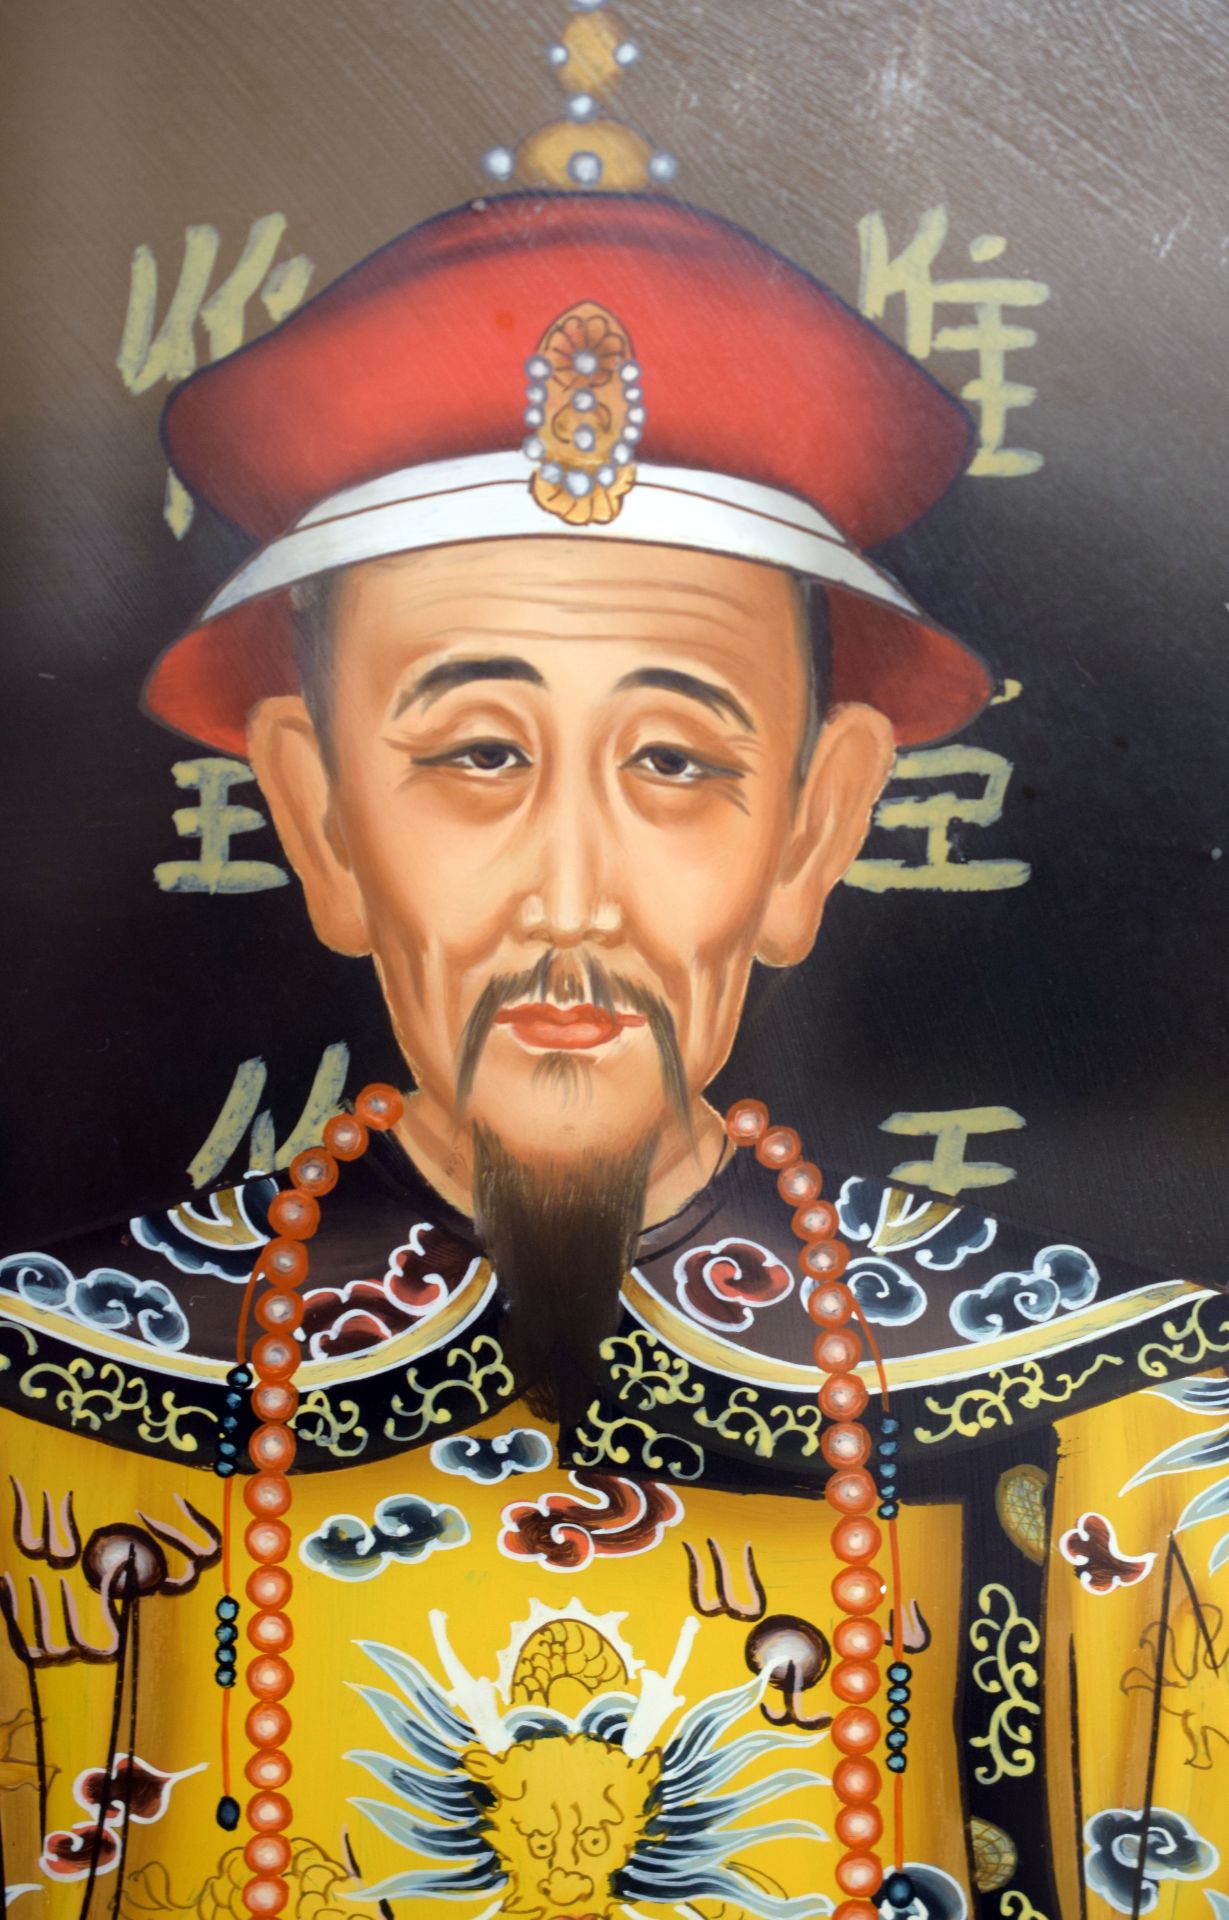 Vintage Chinese Reverse Oil On Glass Portraits Of The First Emperor & Empress Of China - Image 3 of 4